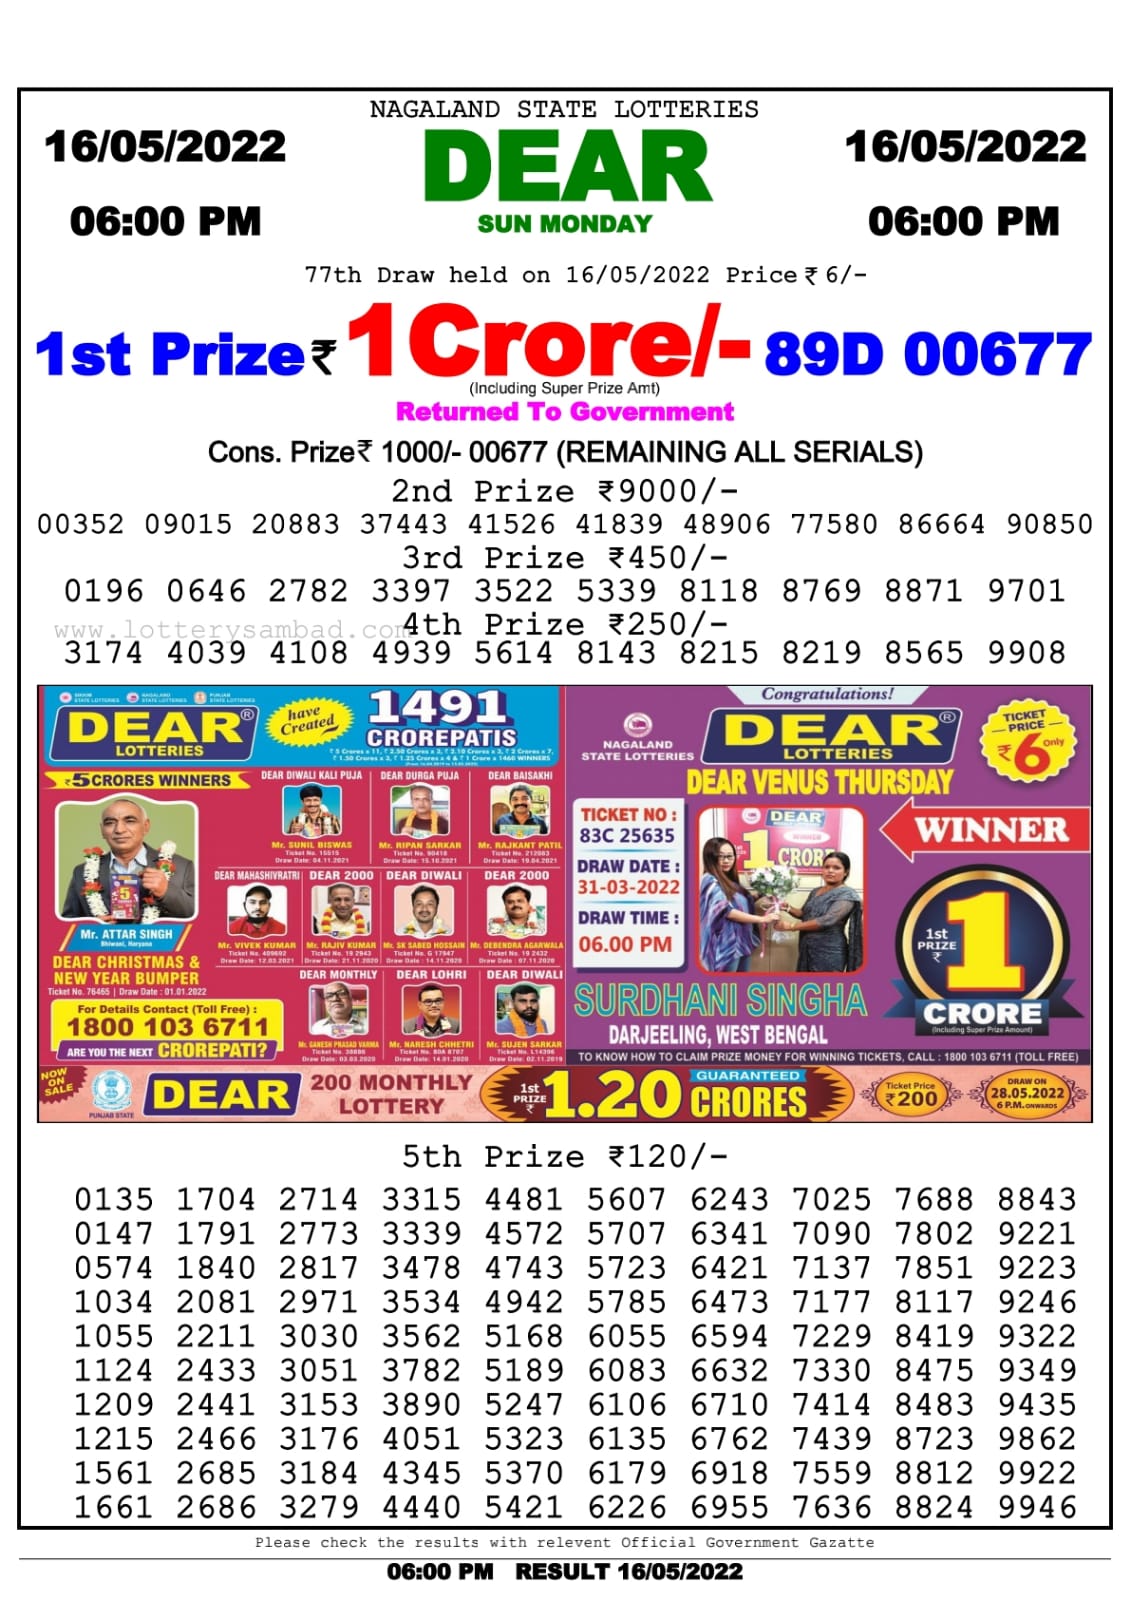 Dear Lottery Nagaland state Lottery Results 06.00 pm 16.05.2022